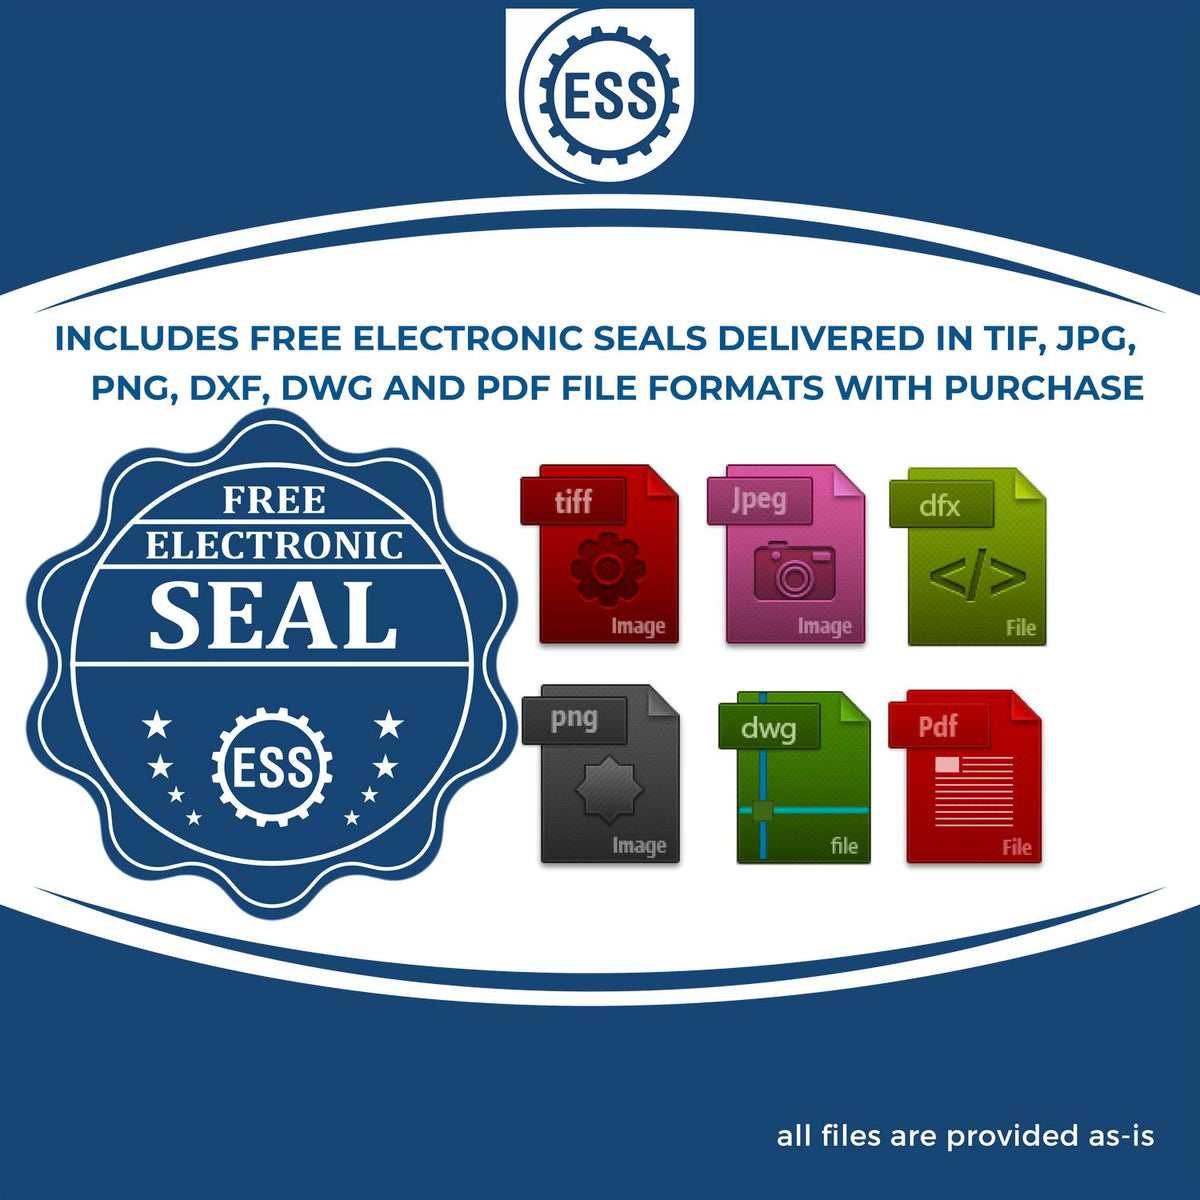 An infographic for the free electronic seal for the Self-Inking Minnesota PE Stamp illustrating the different file type icons such as DXF, DWG, TIF, JPG and PNG.